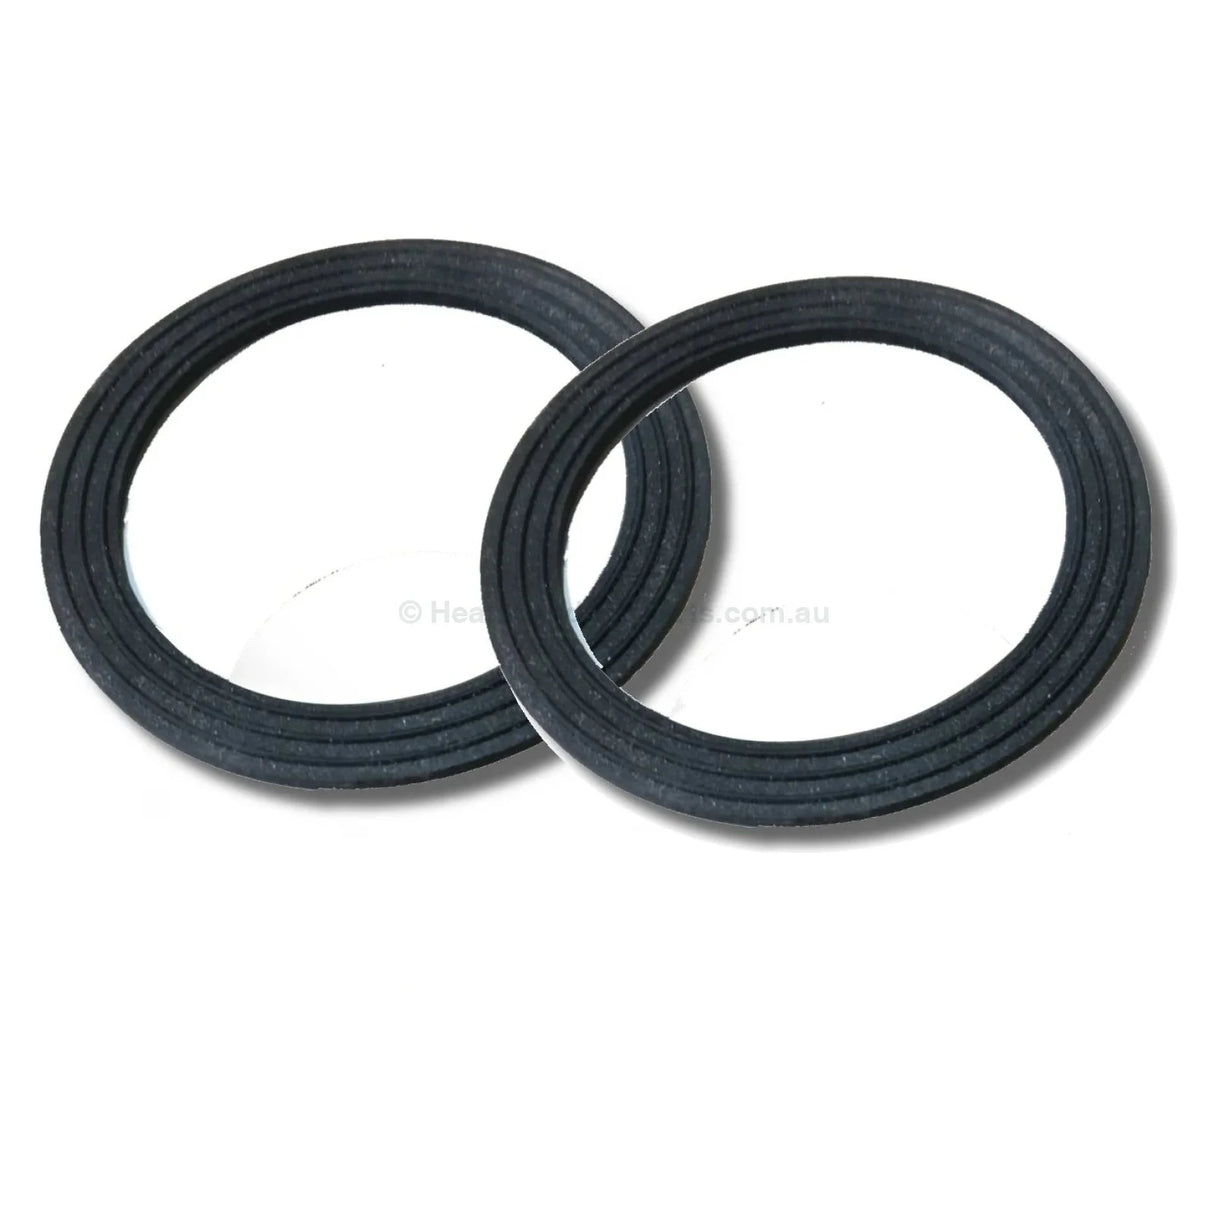 Spanet Spanet SV 50mm Heater O-Ring Gaskets - Pair - Heater and Spa Parts